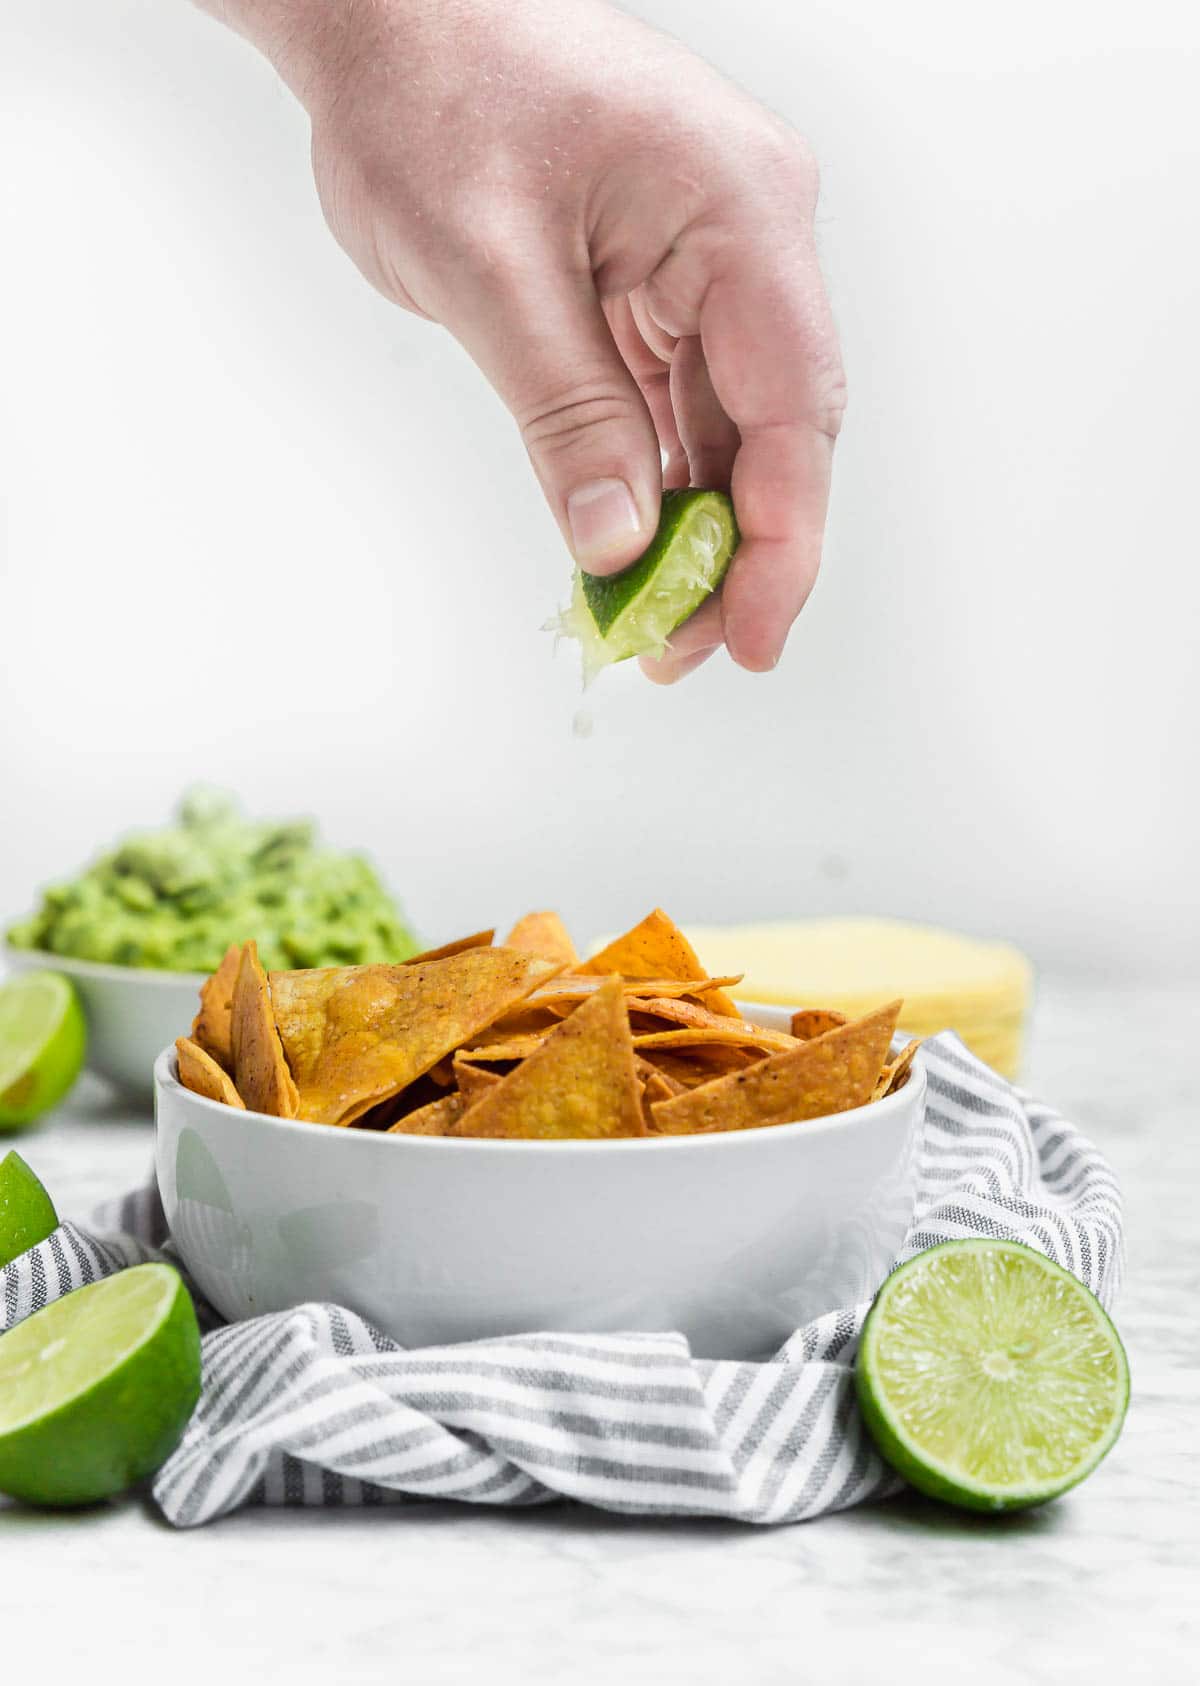 Gluten-Free Baked Chili Lime Tortilla Chips in the Oven